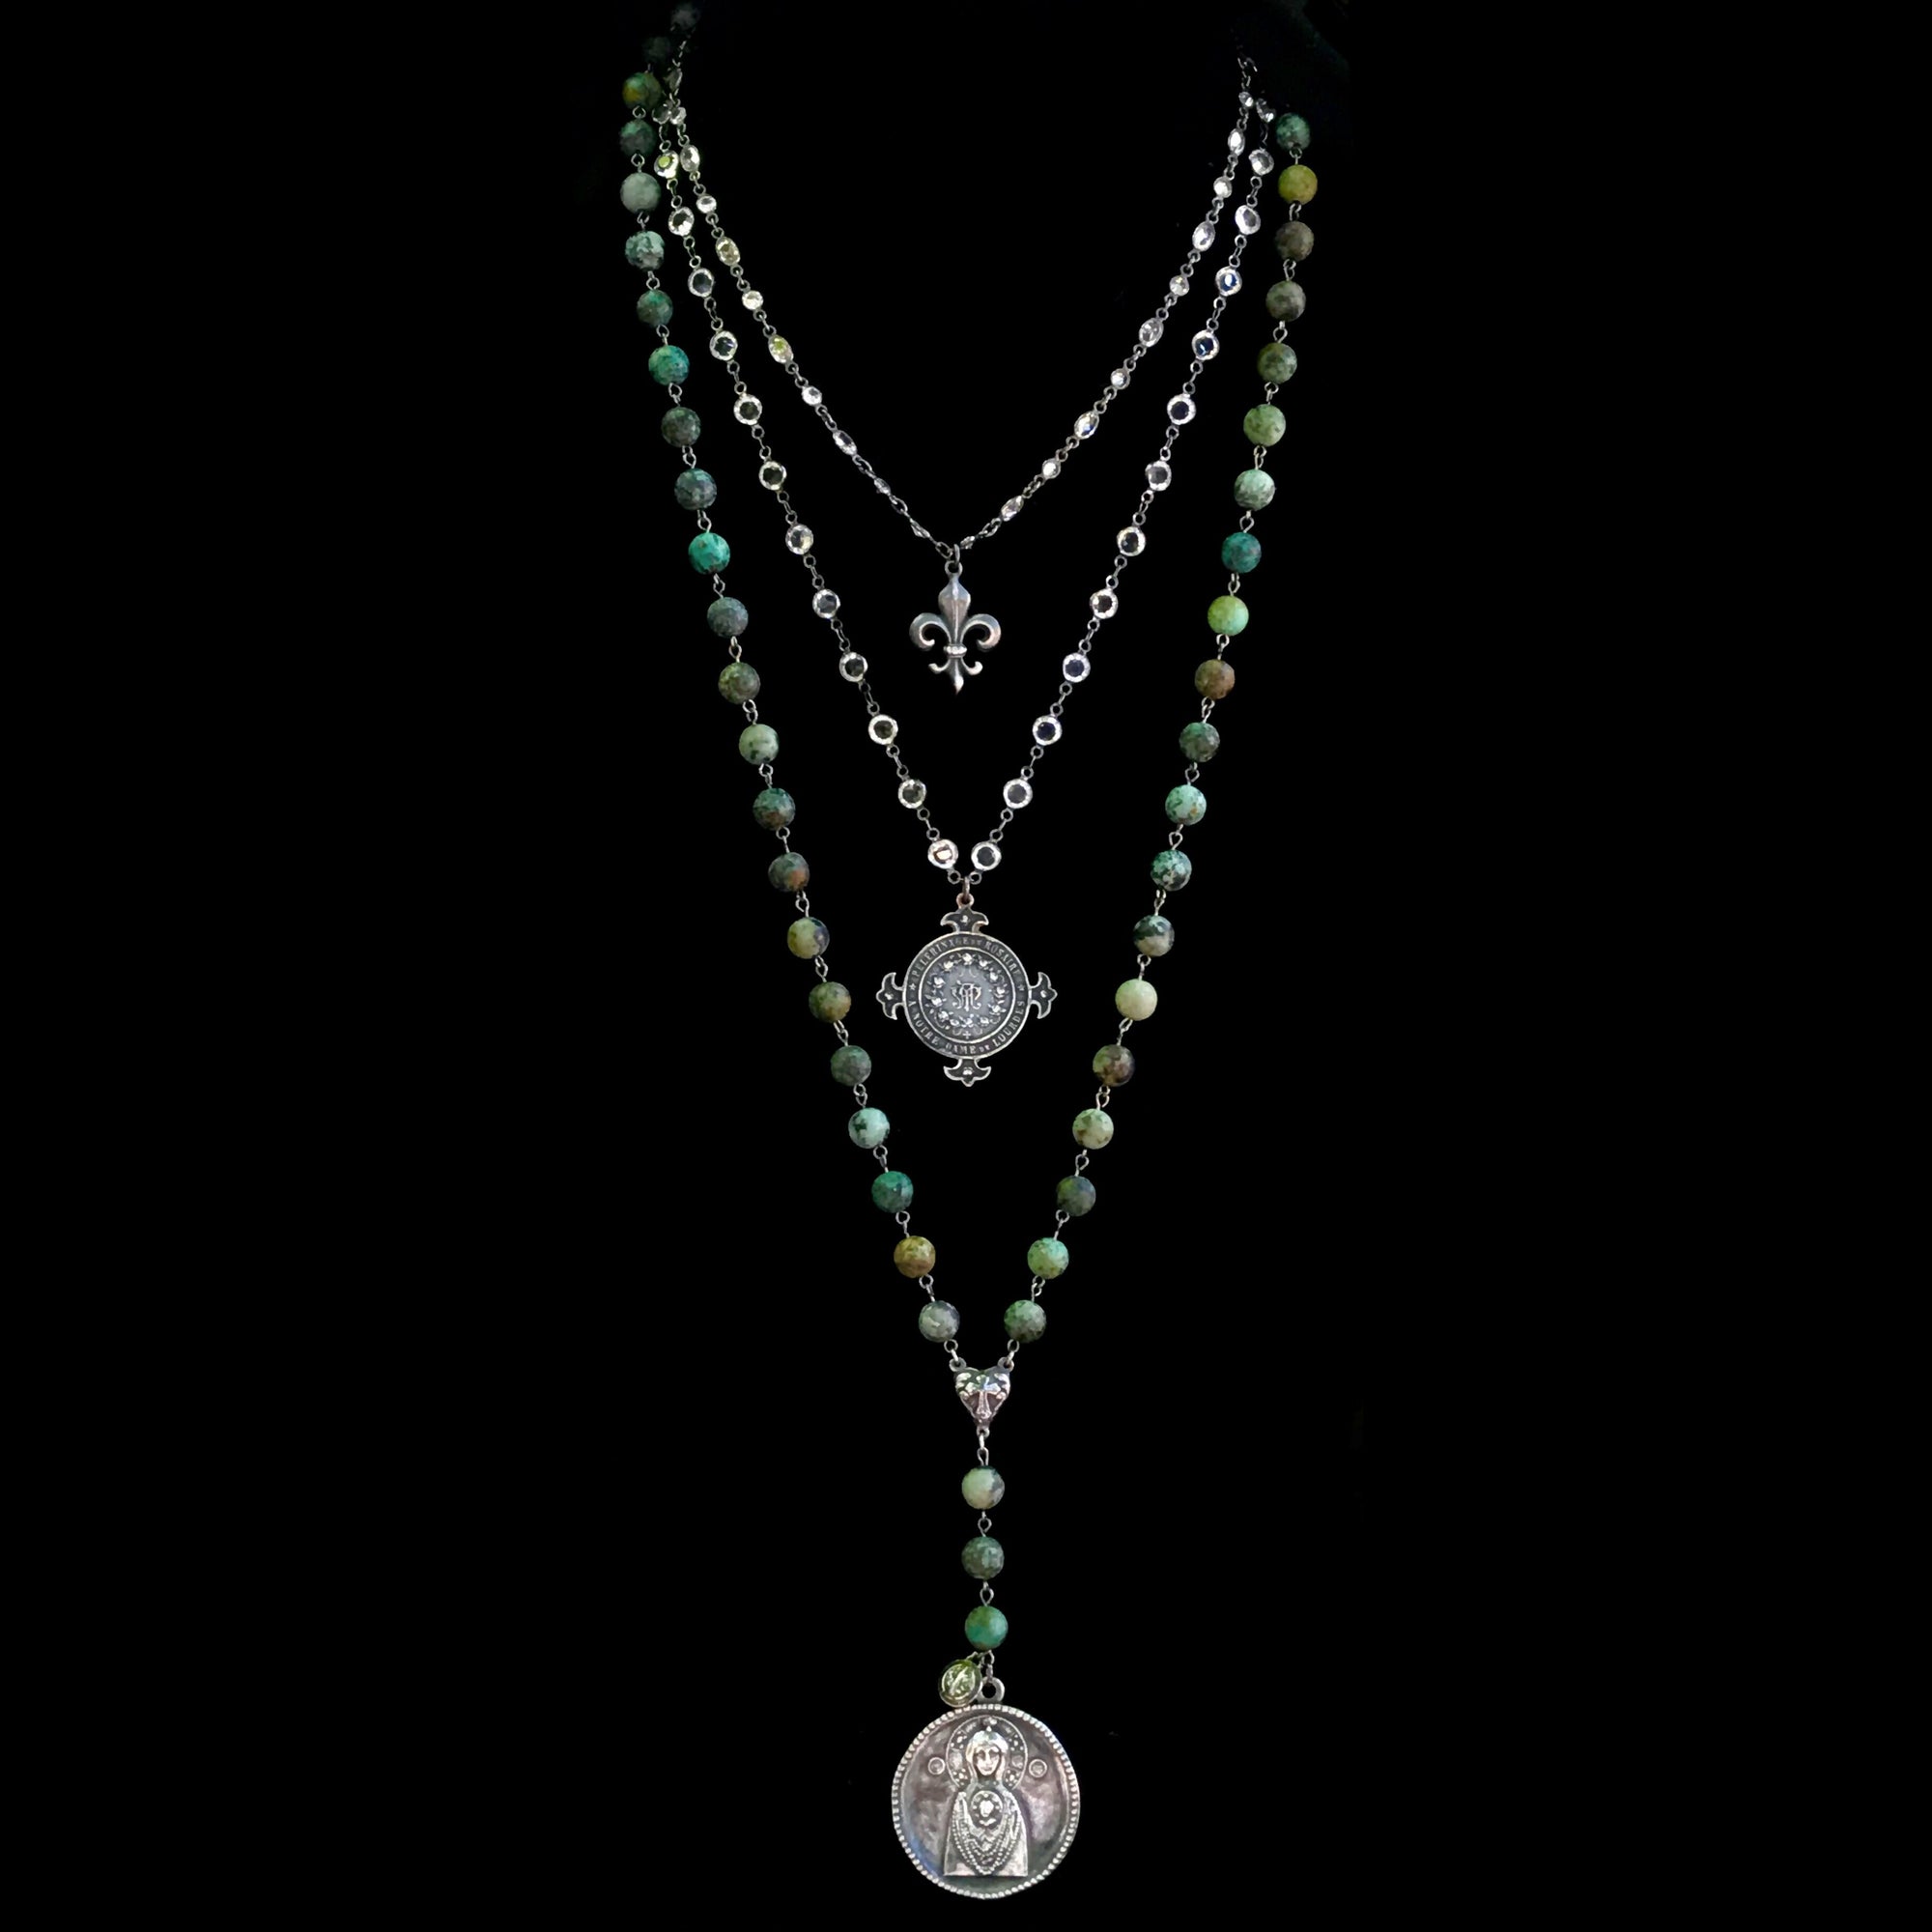 Illumination Wisdom Necklace with Saint Gabriel and Theotokos in African Turquoise